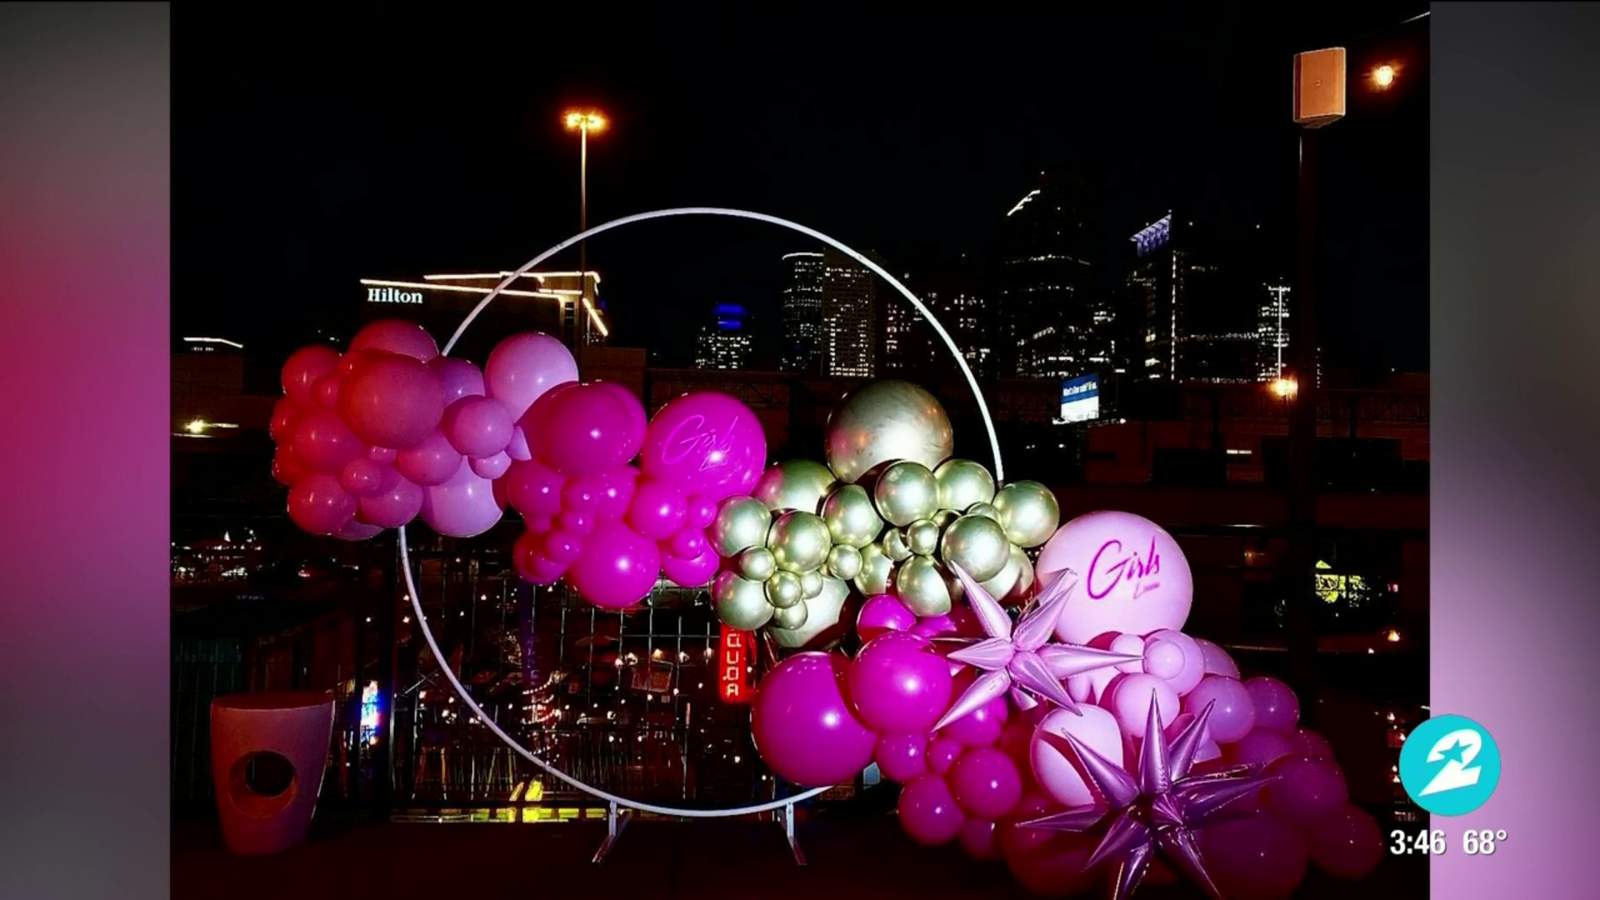 Balloon Luxe Events creates one-of-a-kind, custom balloon decorations for your special occasions